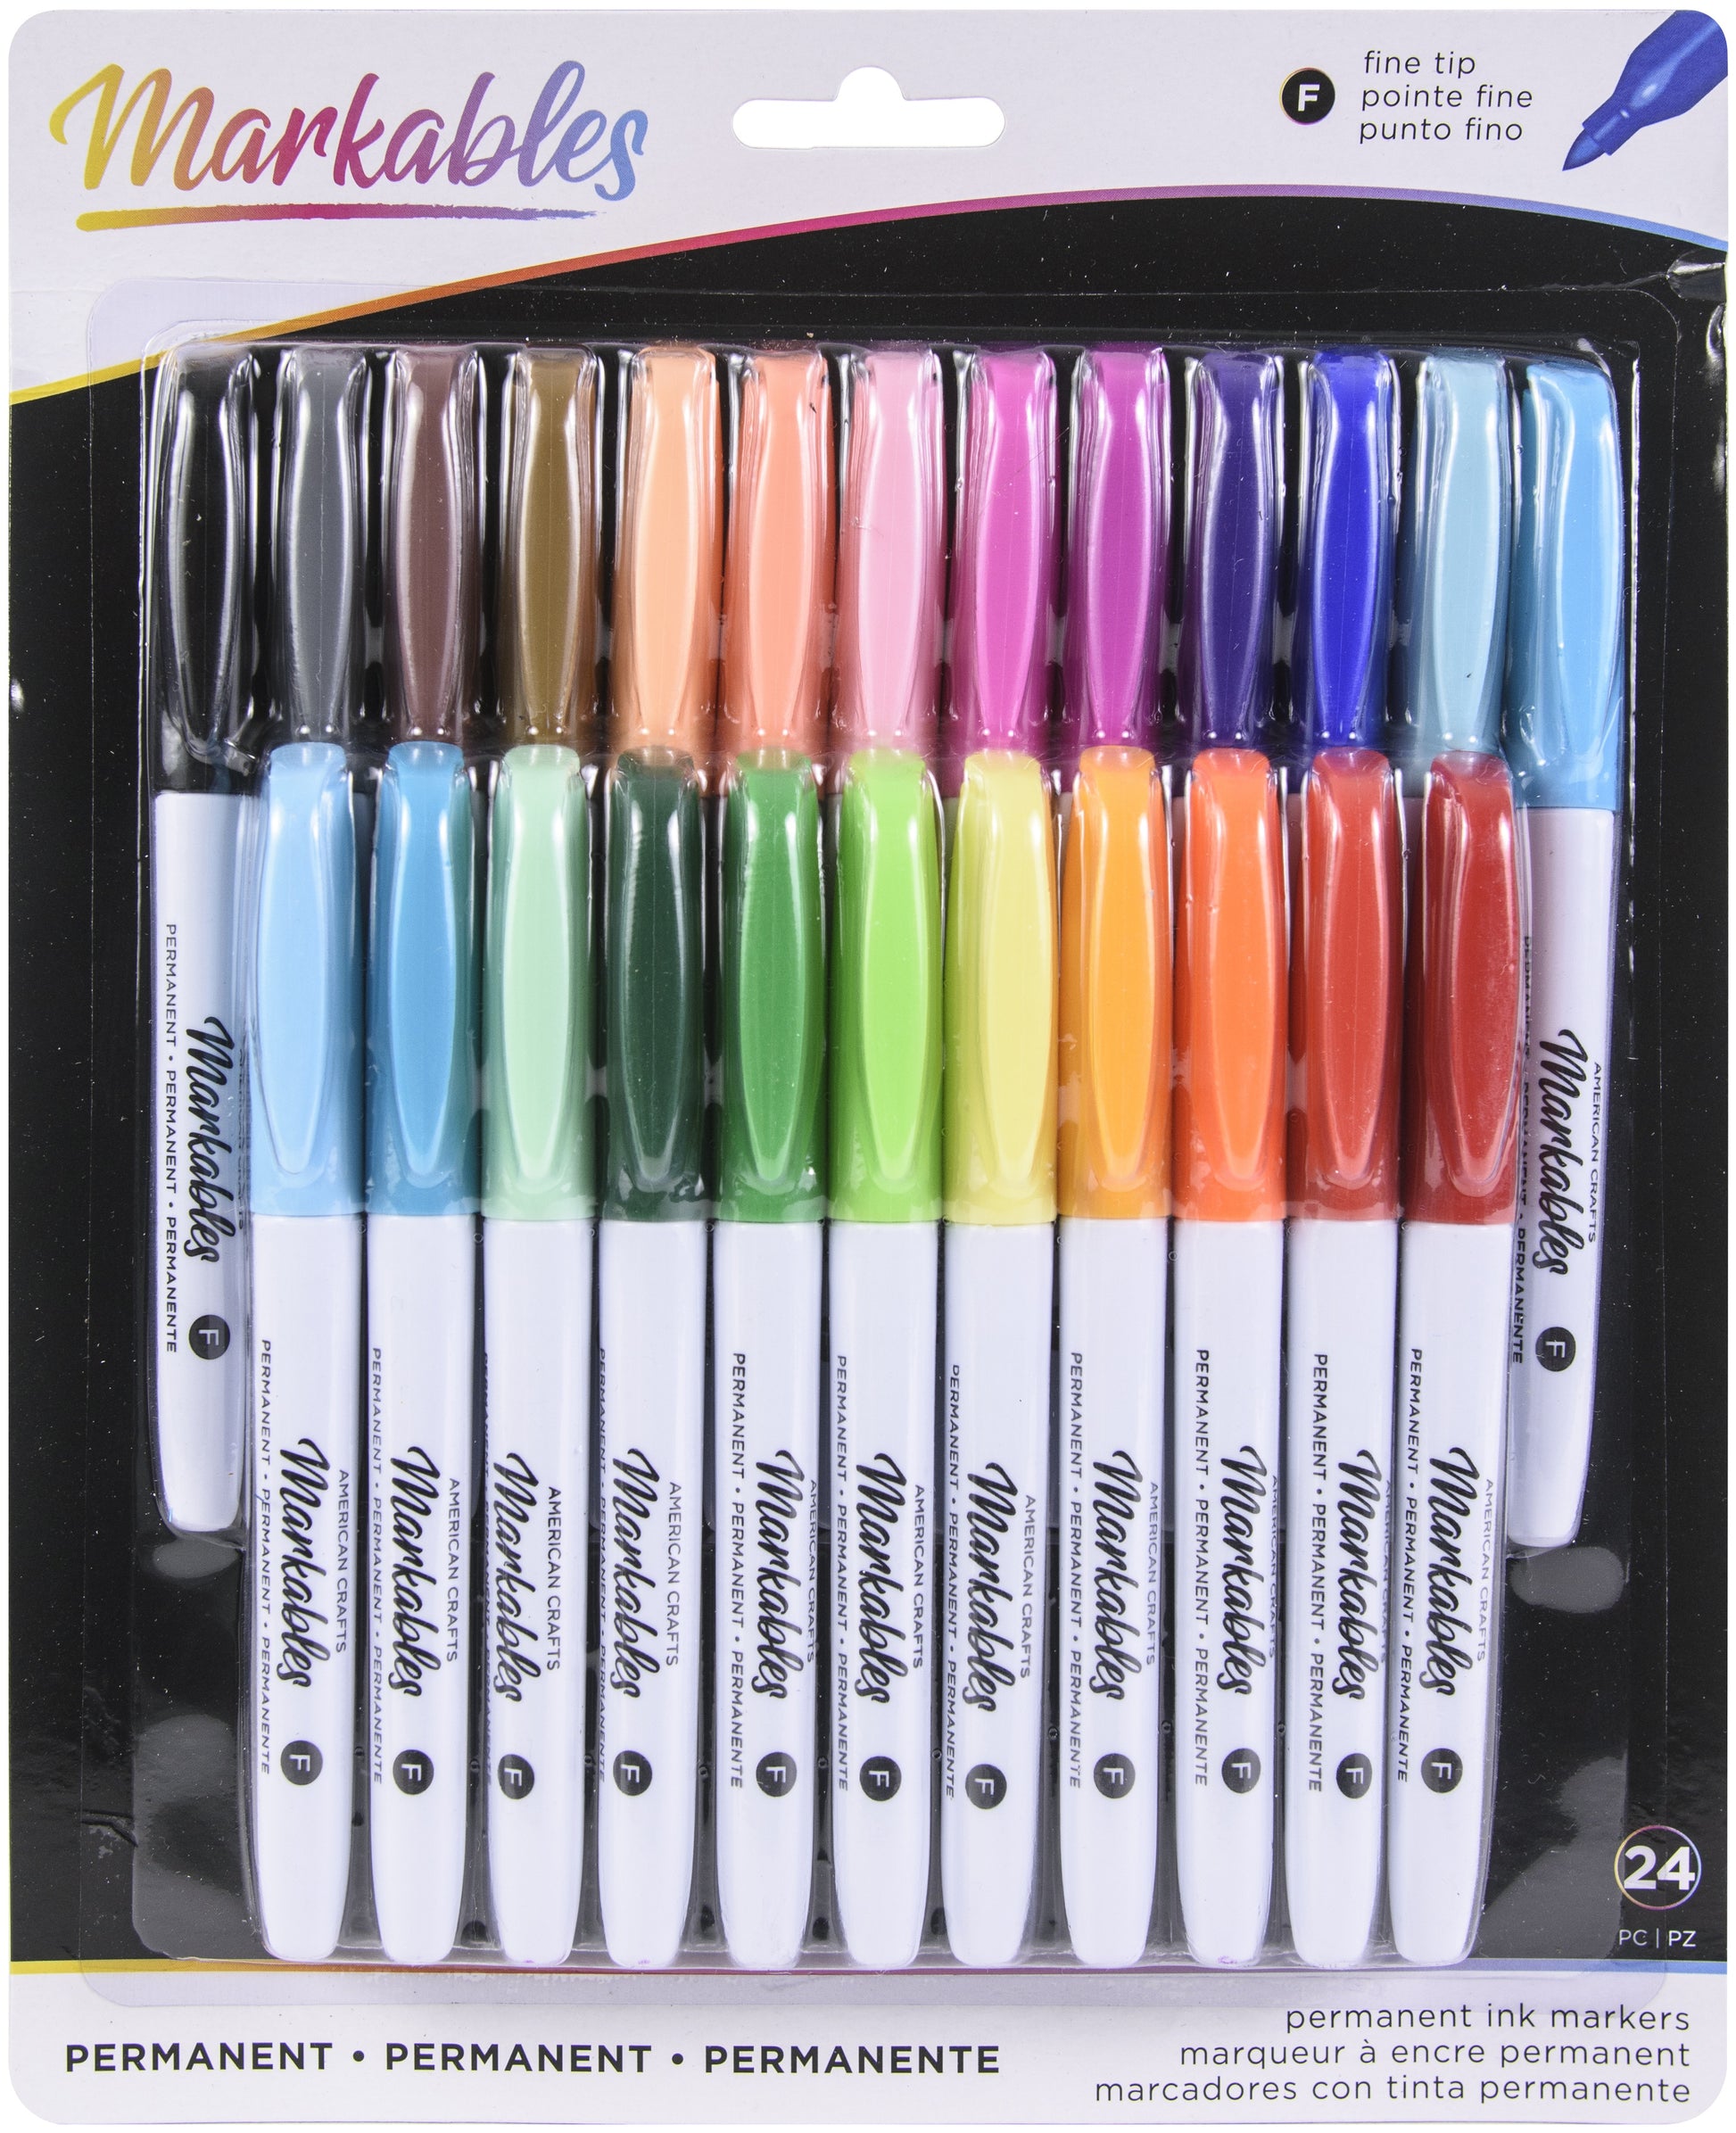 American Crafts Markables Permanent Markers 24 Pkg Assorted Colors